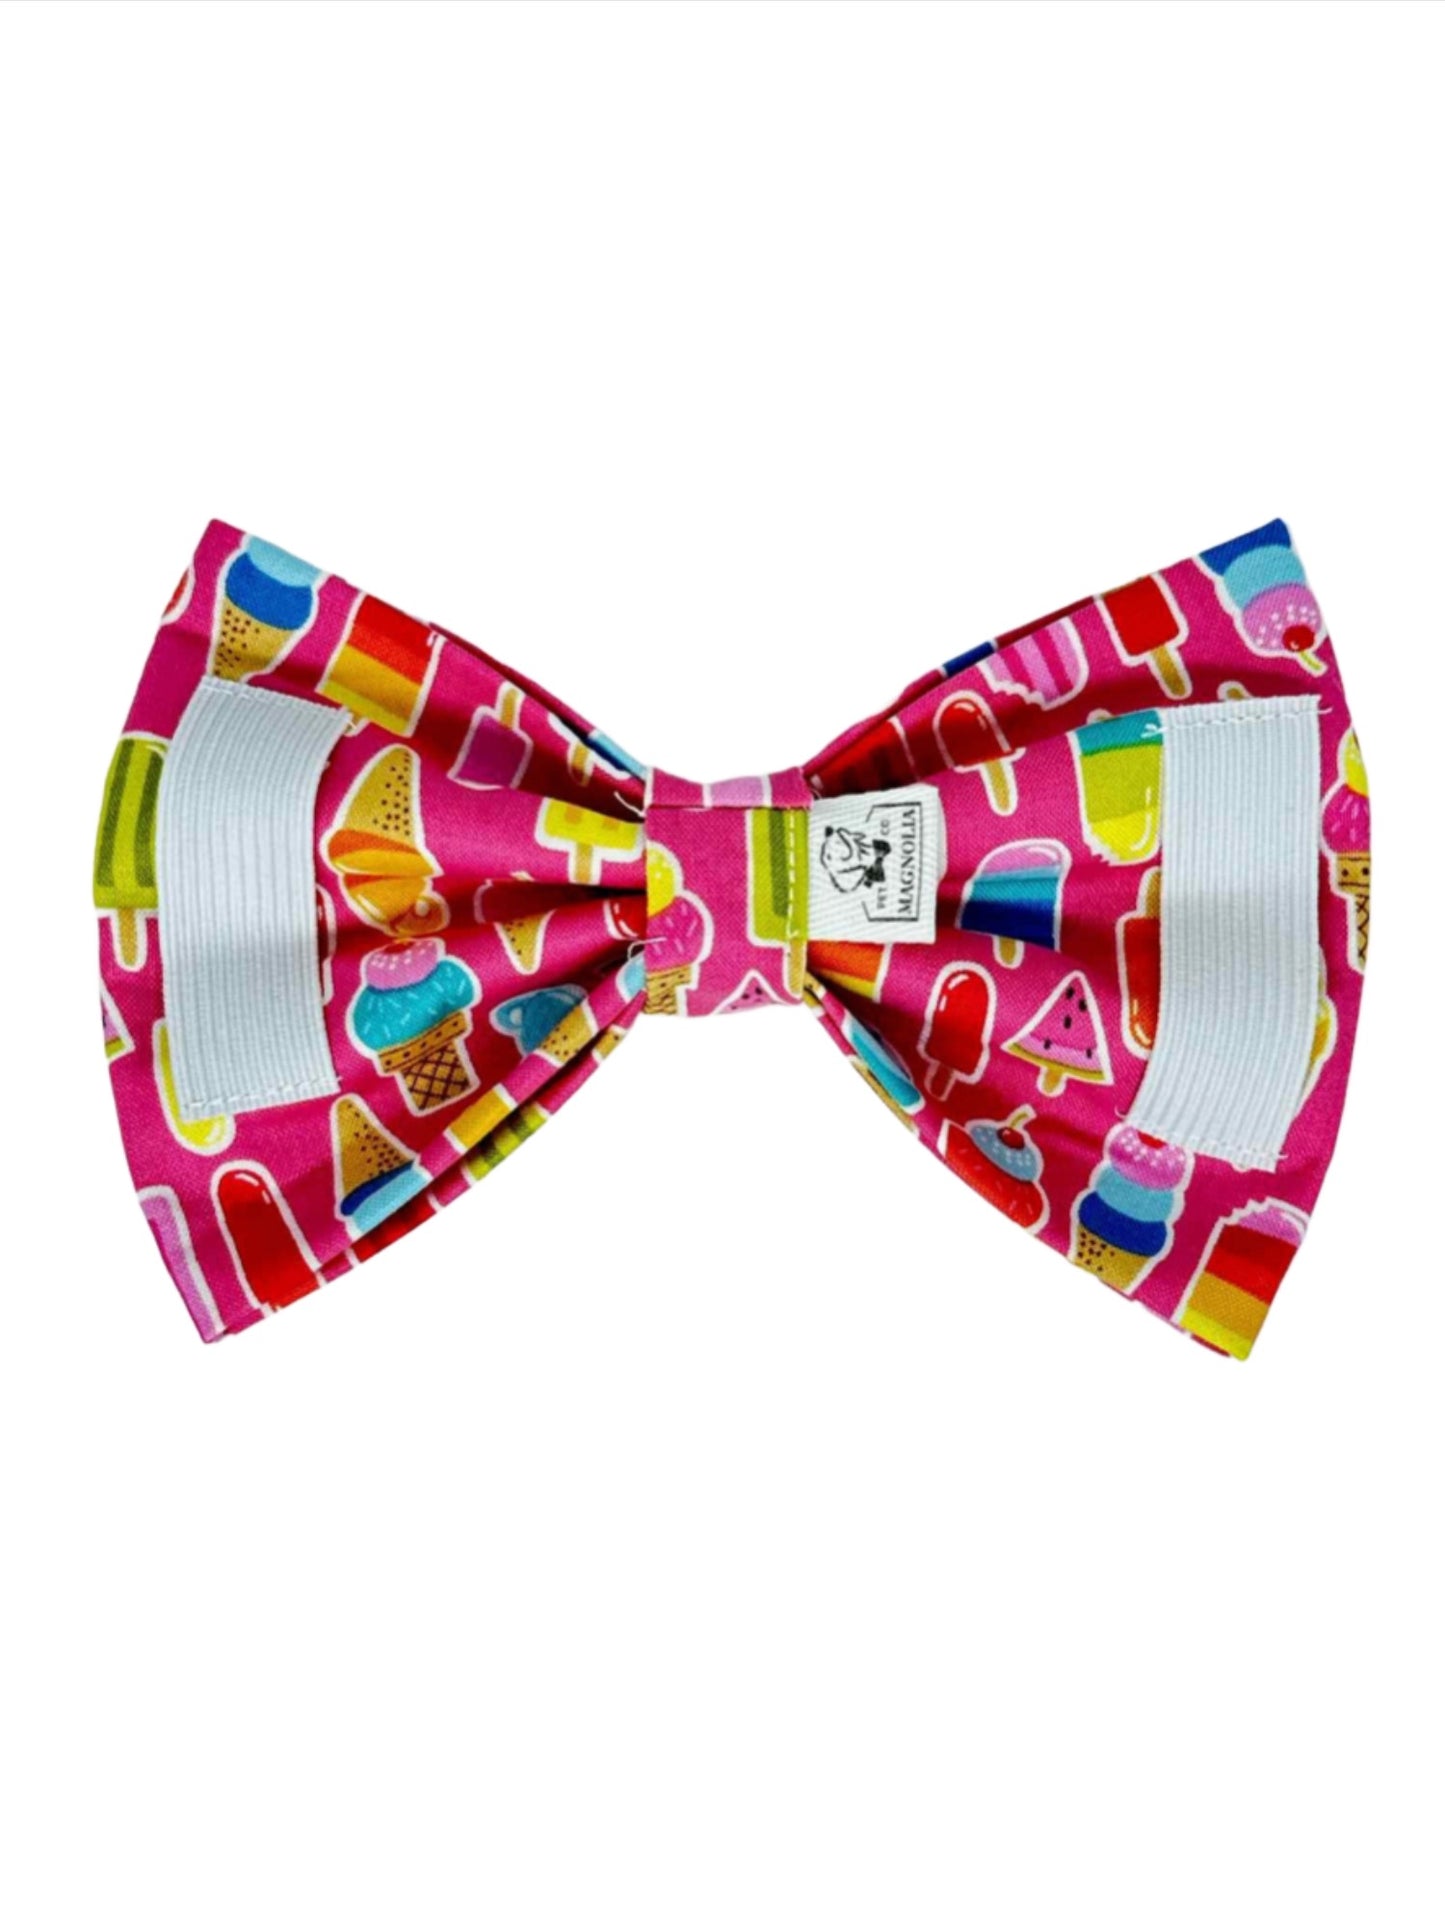 Hot Summer Chilly Delights Dog Bow Tie